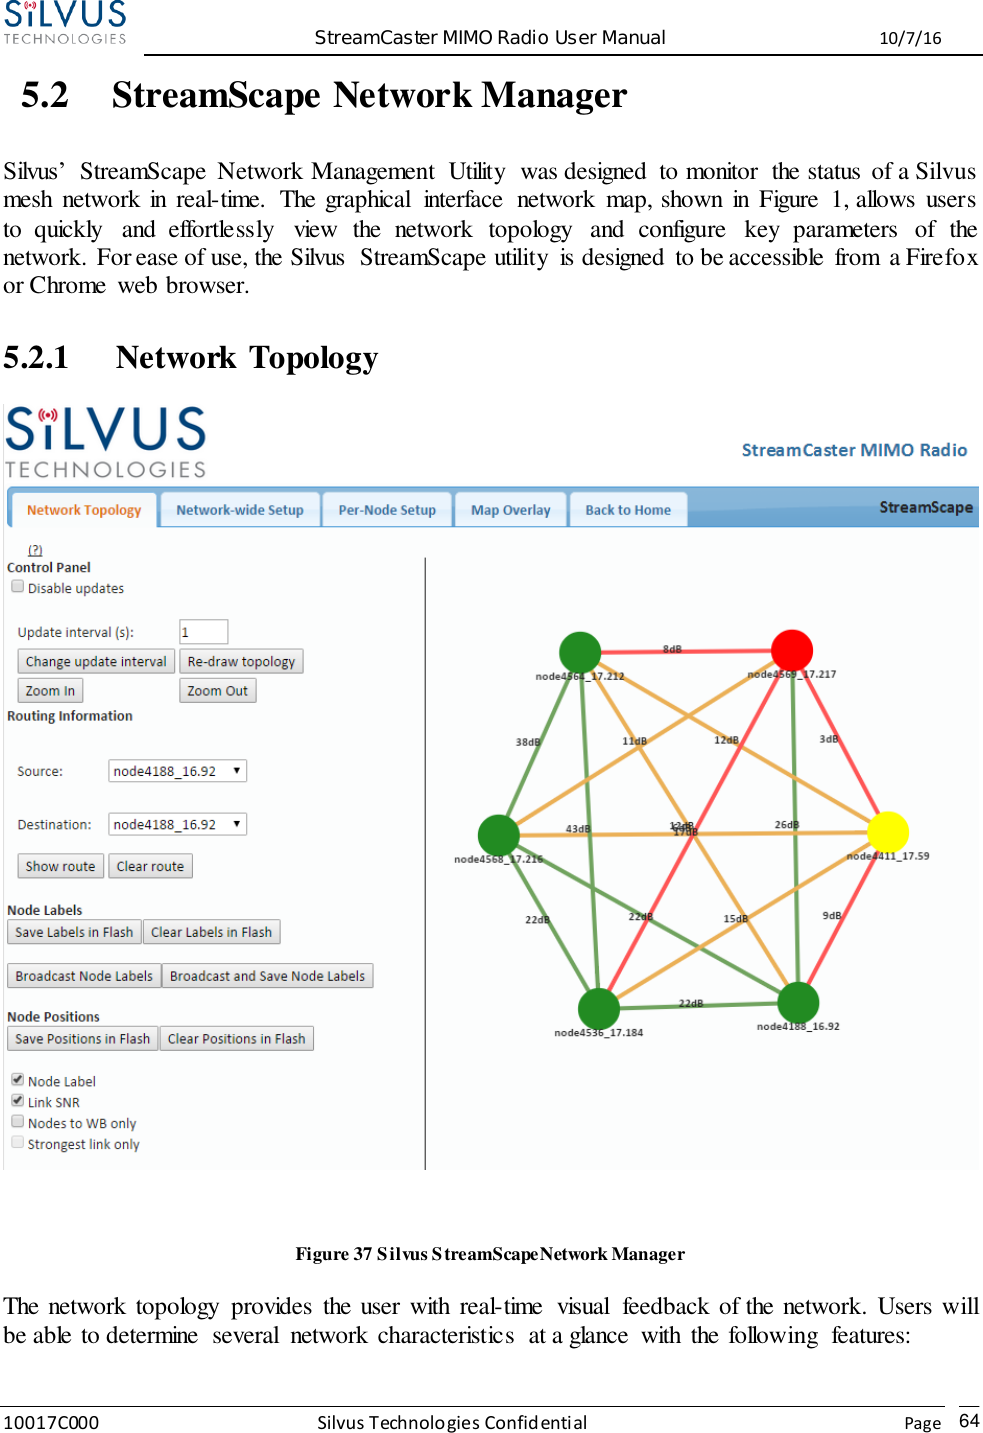  StreamCaster MIMO Radio User Manual  10/7/16 10017C000 Silvus Technologies Confidential    Page   64 5.2 StreamScape Network Manager  Silvus’  StreamScape  Network Management  Utility  was designed  to monitor  the status  of a Silvus mesh  network in  real-time.  The graphical  interface  network  map, shown  in  Figure  1, allows  users to  quickly  and  effortlessly  view  the  network  topology  and  configure  key  parameters  of  the network. For ease of use, the Silvus  StreamScape utility  is designed  to be accessible  from  a Firefox or Chrome  web browser.  5.2.1 Network Topology   Figure 37 Silvus StreamScapeNetwork Manager The network topology  provides  the user with  real-time  visual  feedback of the network. Users will be able to determine  several  network characteristics  at a glance  with  the following  features:    